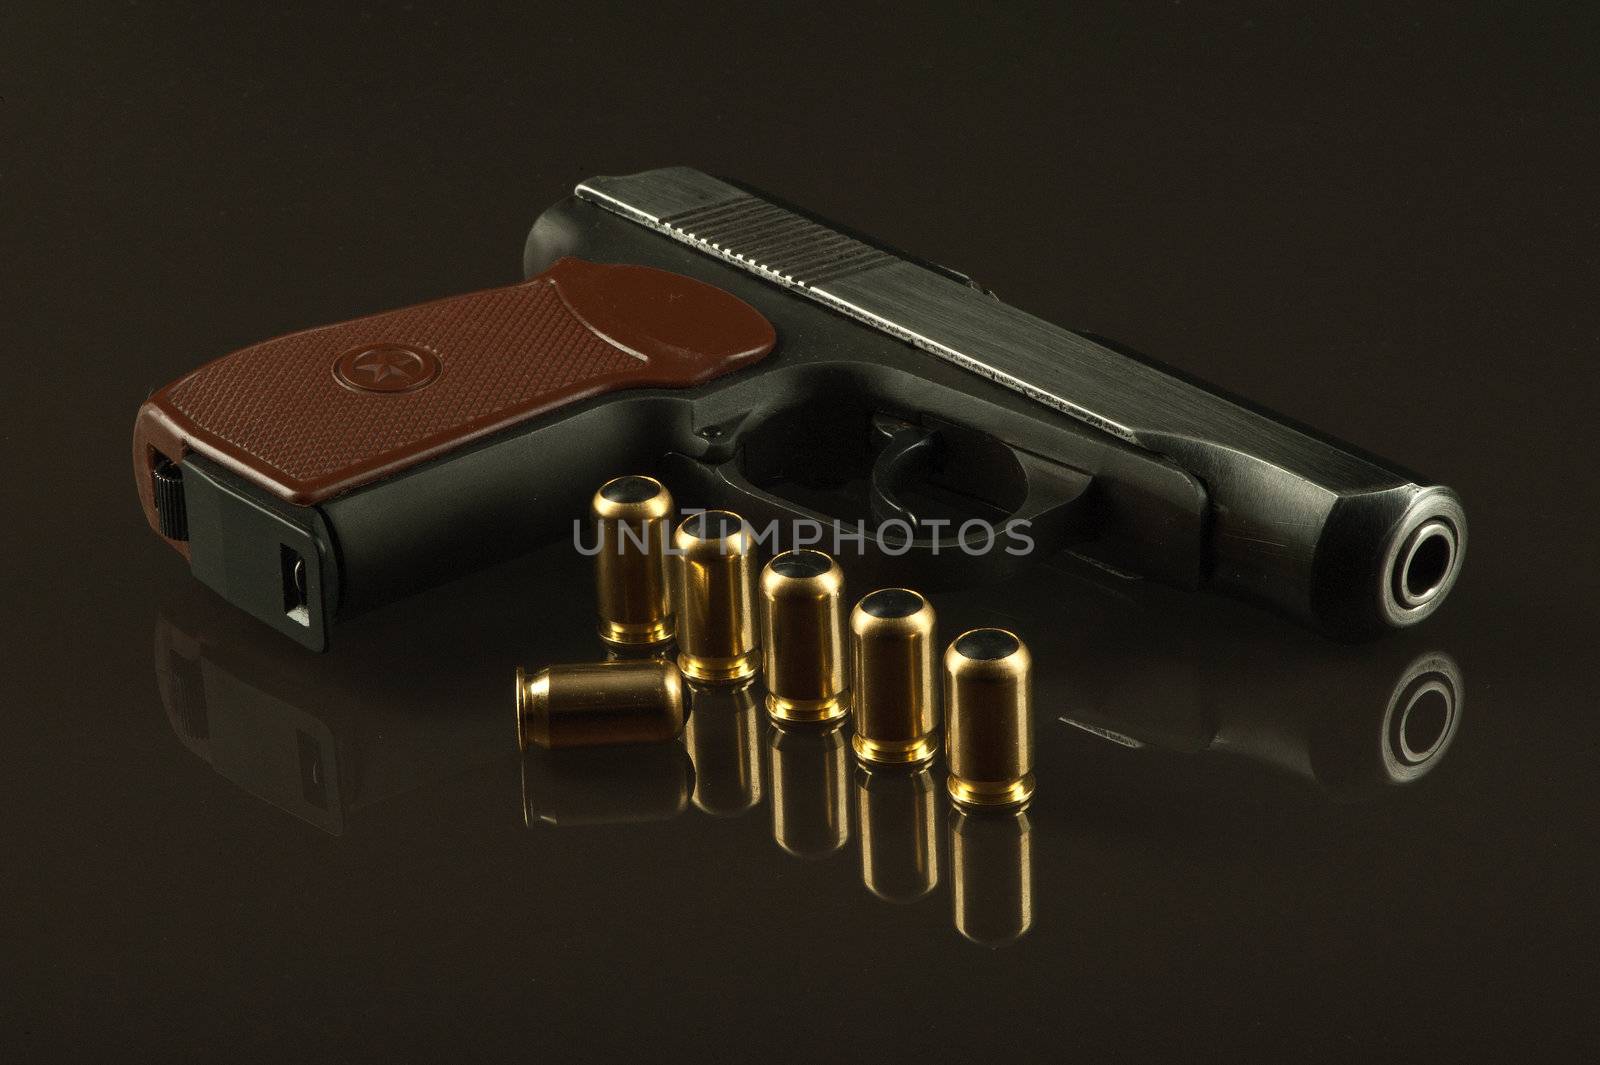 A gun and 7 bullets on a glass table over a dark background